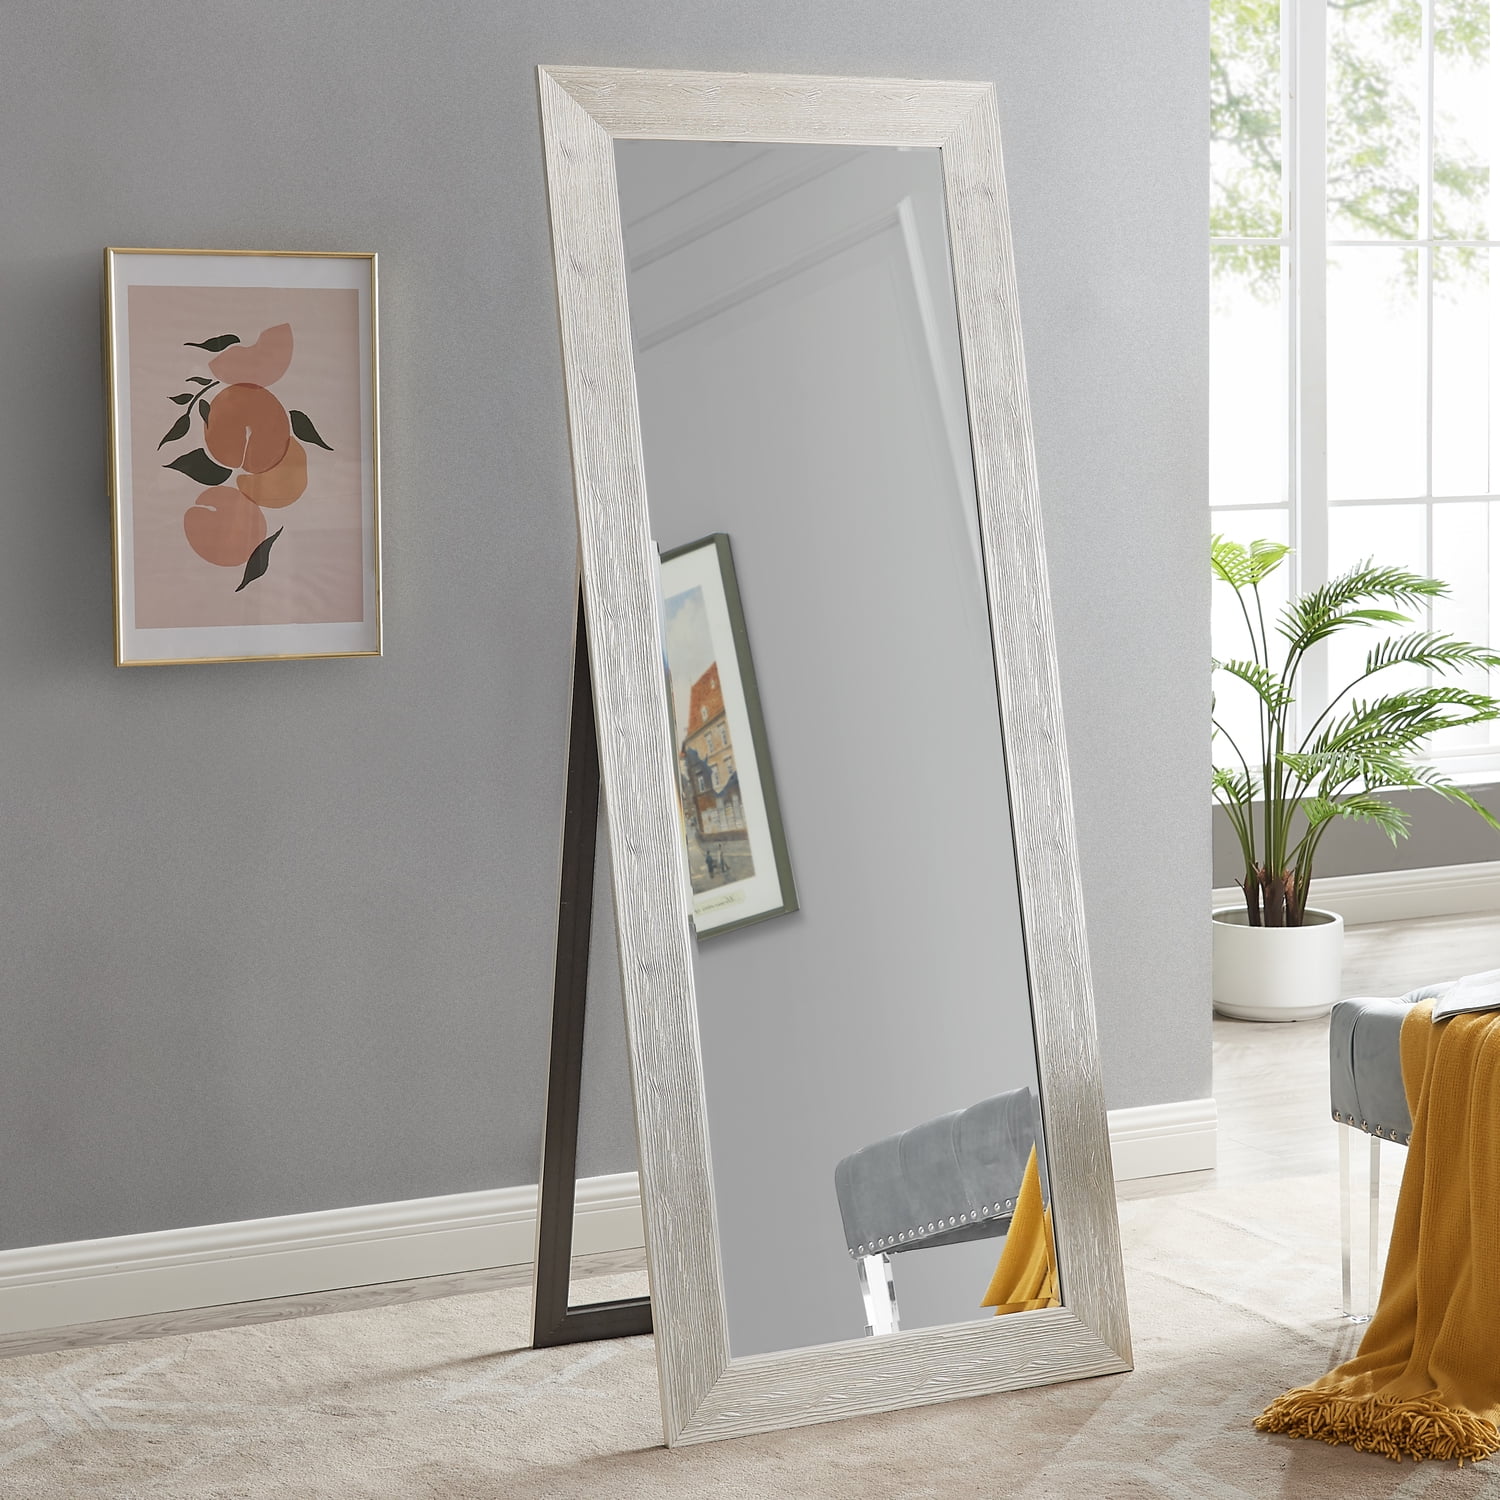 Natural Full Body Mirror with Stand Wooden Framed Floor Length Mirror Stand  Up Full Length Mirror with Stand Mirror